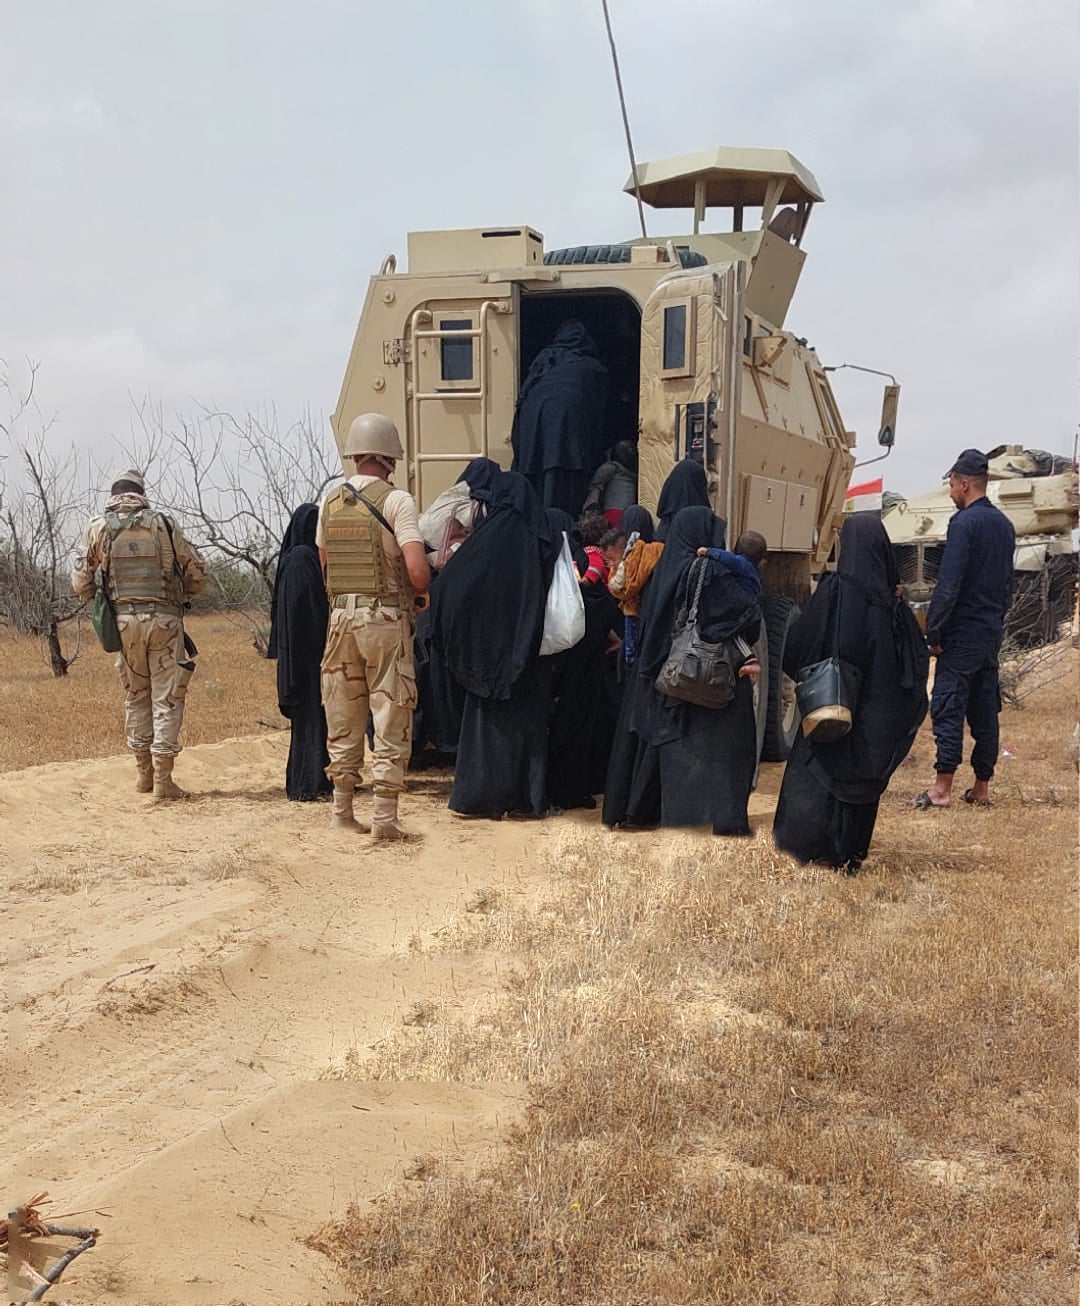 A photo published by a pro-army militia Facebook page, Uswod Al-karama, (which was later deleted) showing a group of women and children, whom the group described as the wives and children of men of the Islamic State affiliate, being arrested by the Egyptian army near al-Moqat’a area south of Sheikh Zuwayed in North Sinai, Egypt.